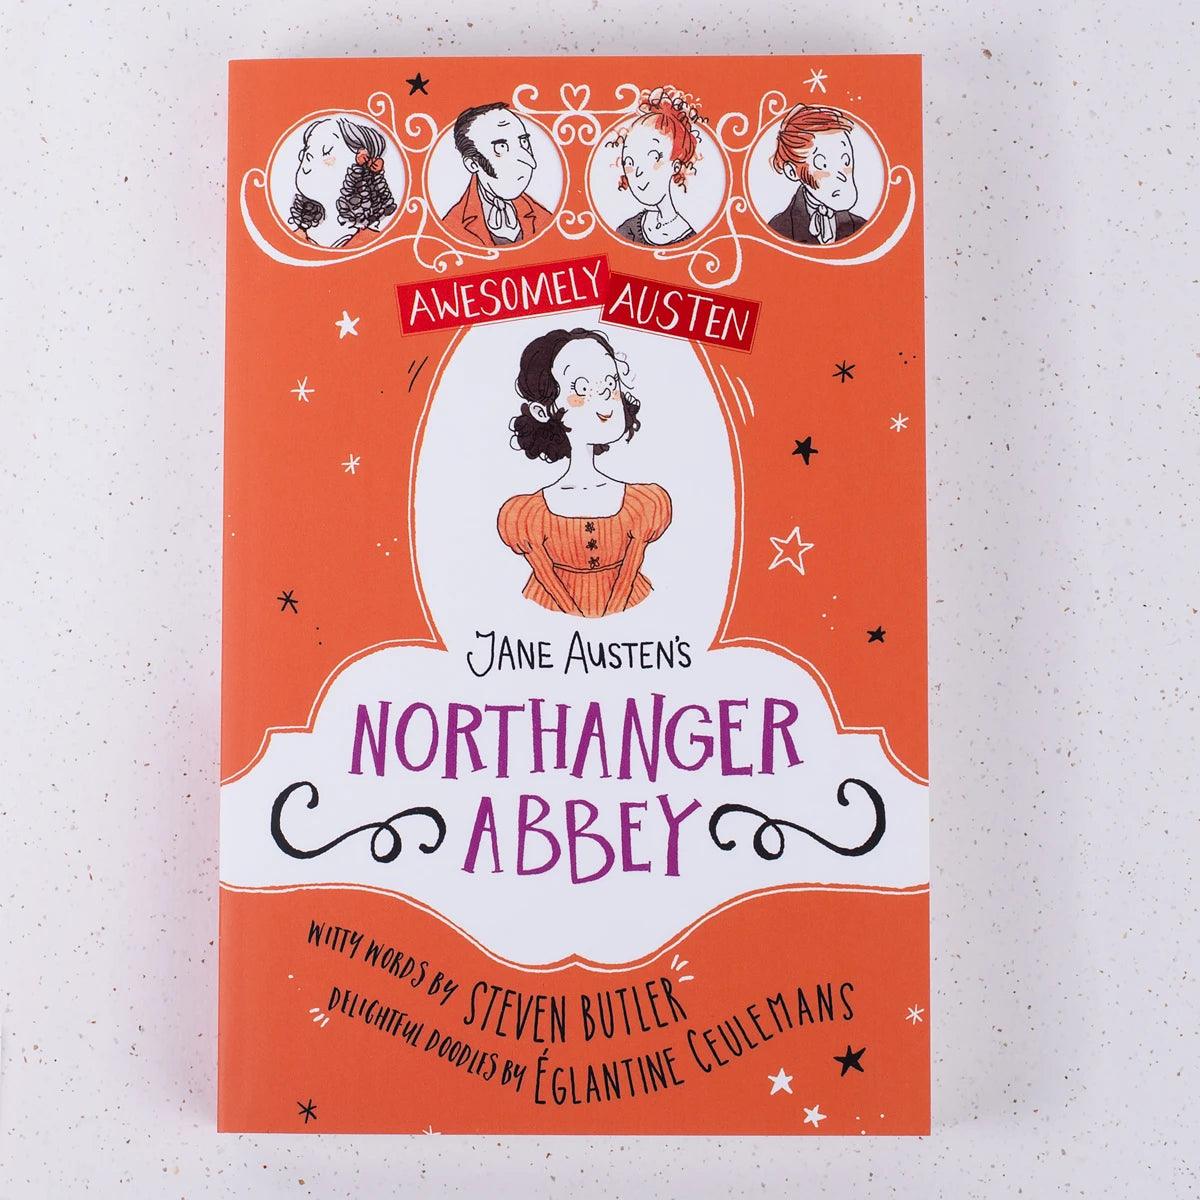 Jane Austen's Northanger Abbey - Awesomely Austen Retold & Illustrated